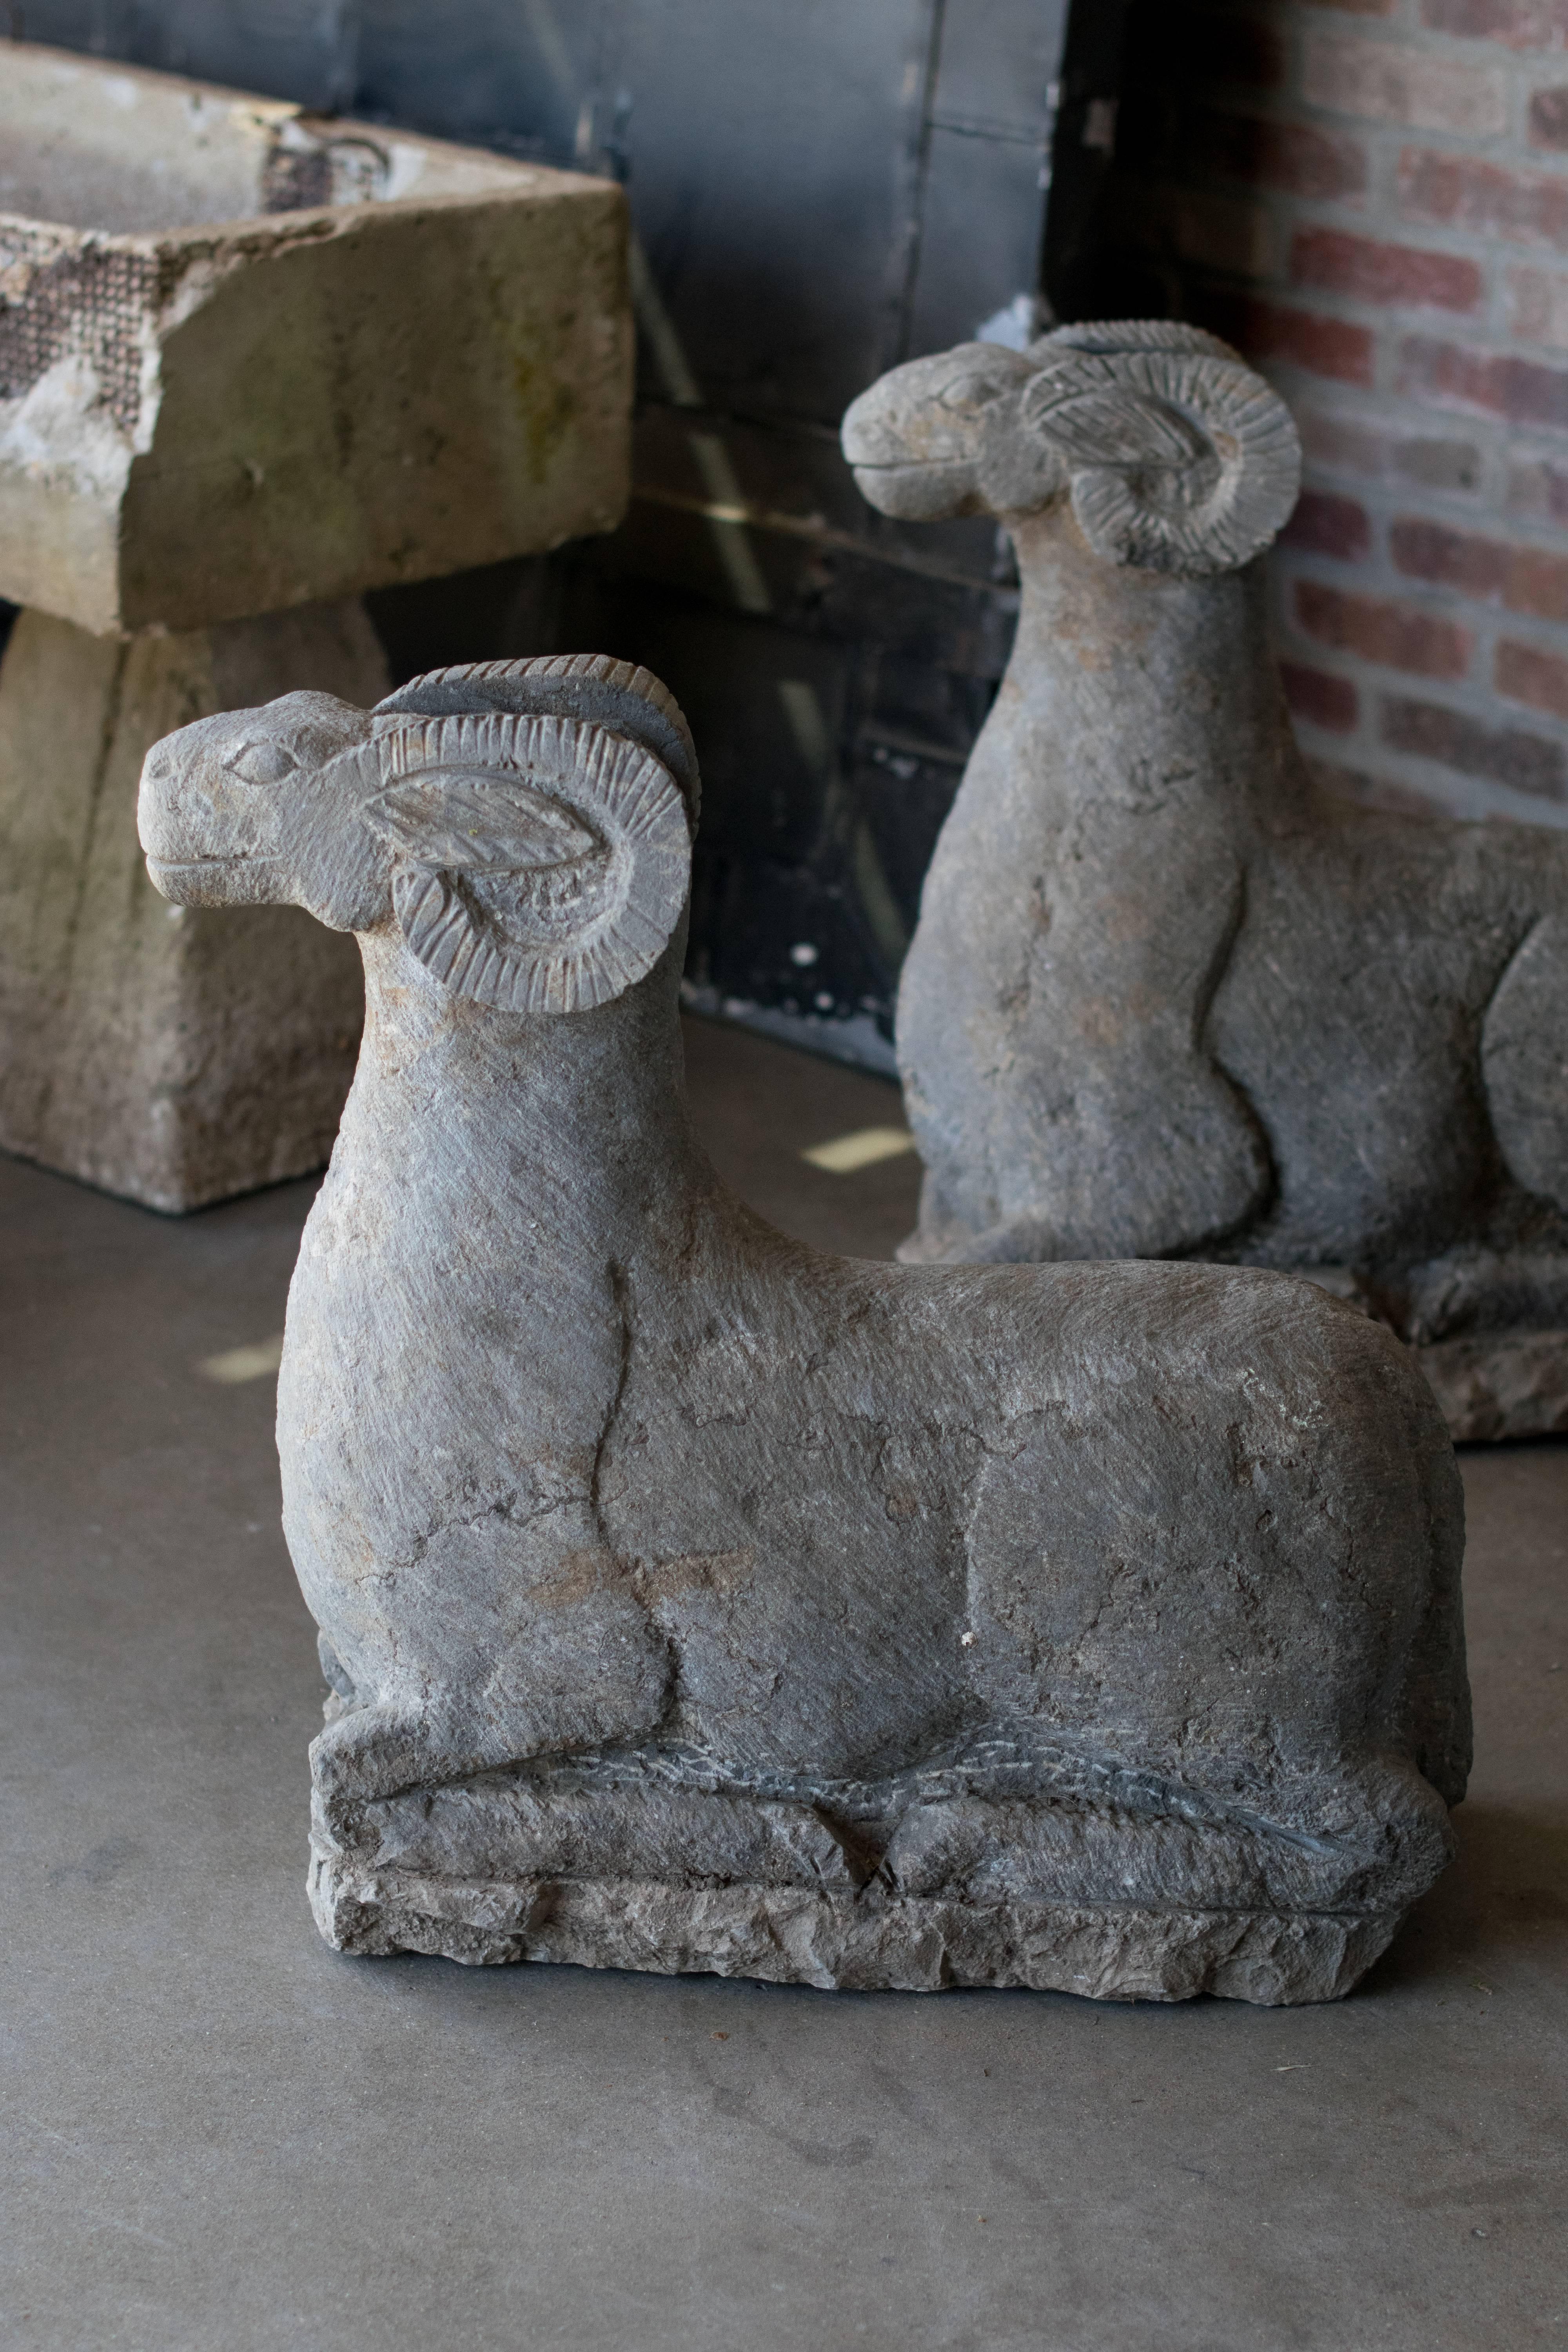 A handsome pair to flank a home or garden entrance. Rams are the long held symbol of determination, action, initiative, and leadership. As the first sign of the zodiac, Aries, the ram is also symbolic of impetuous fervor, renewal, virility and fiery